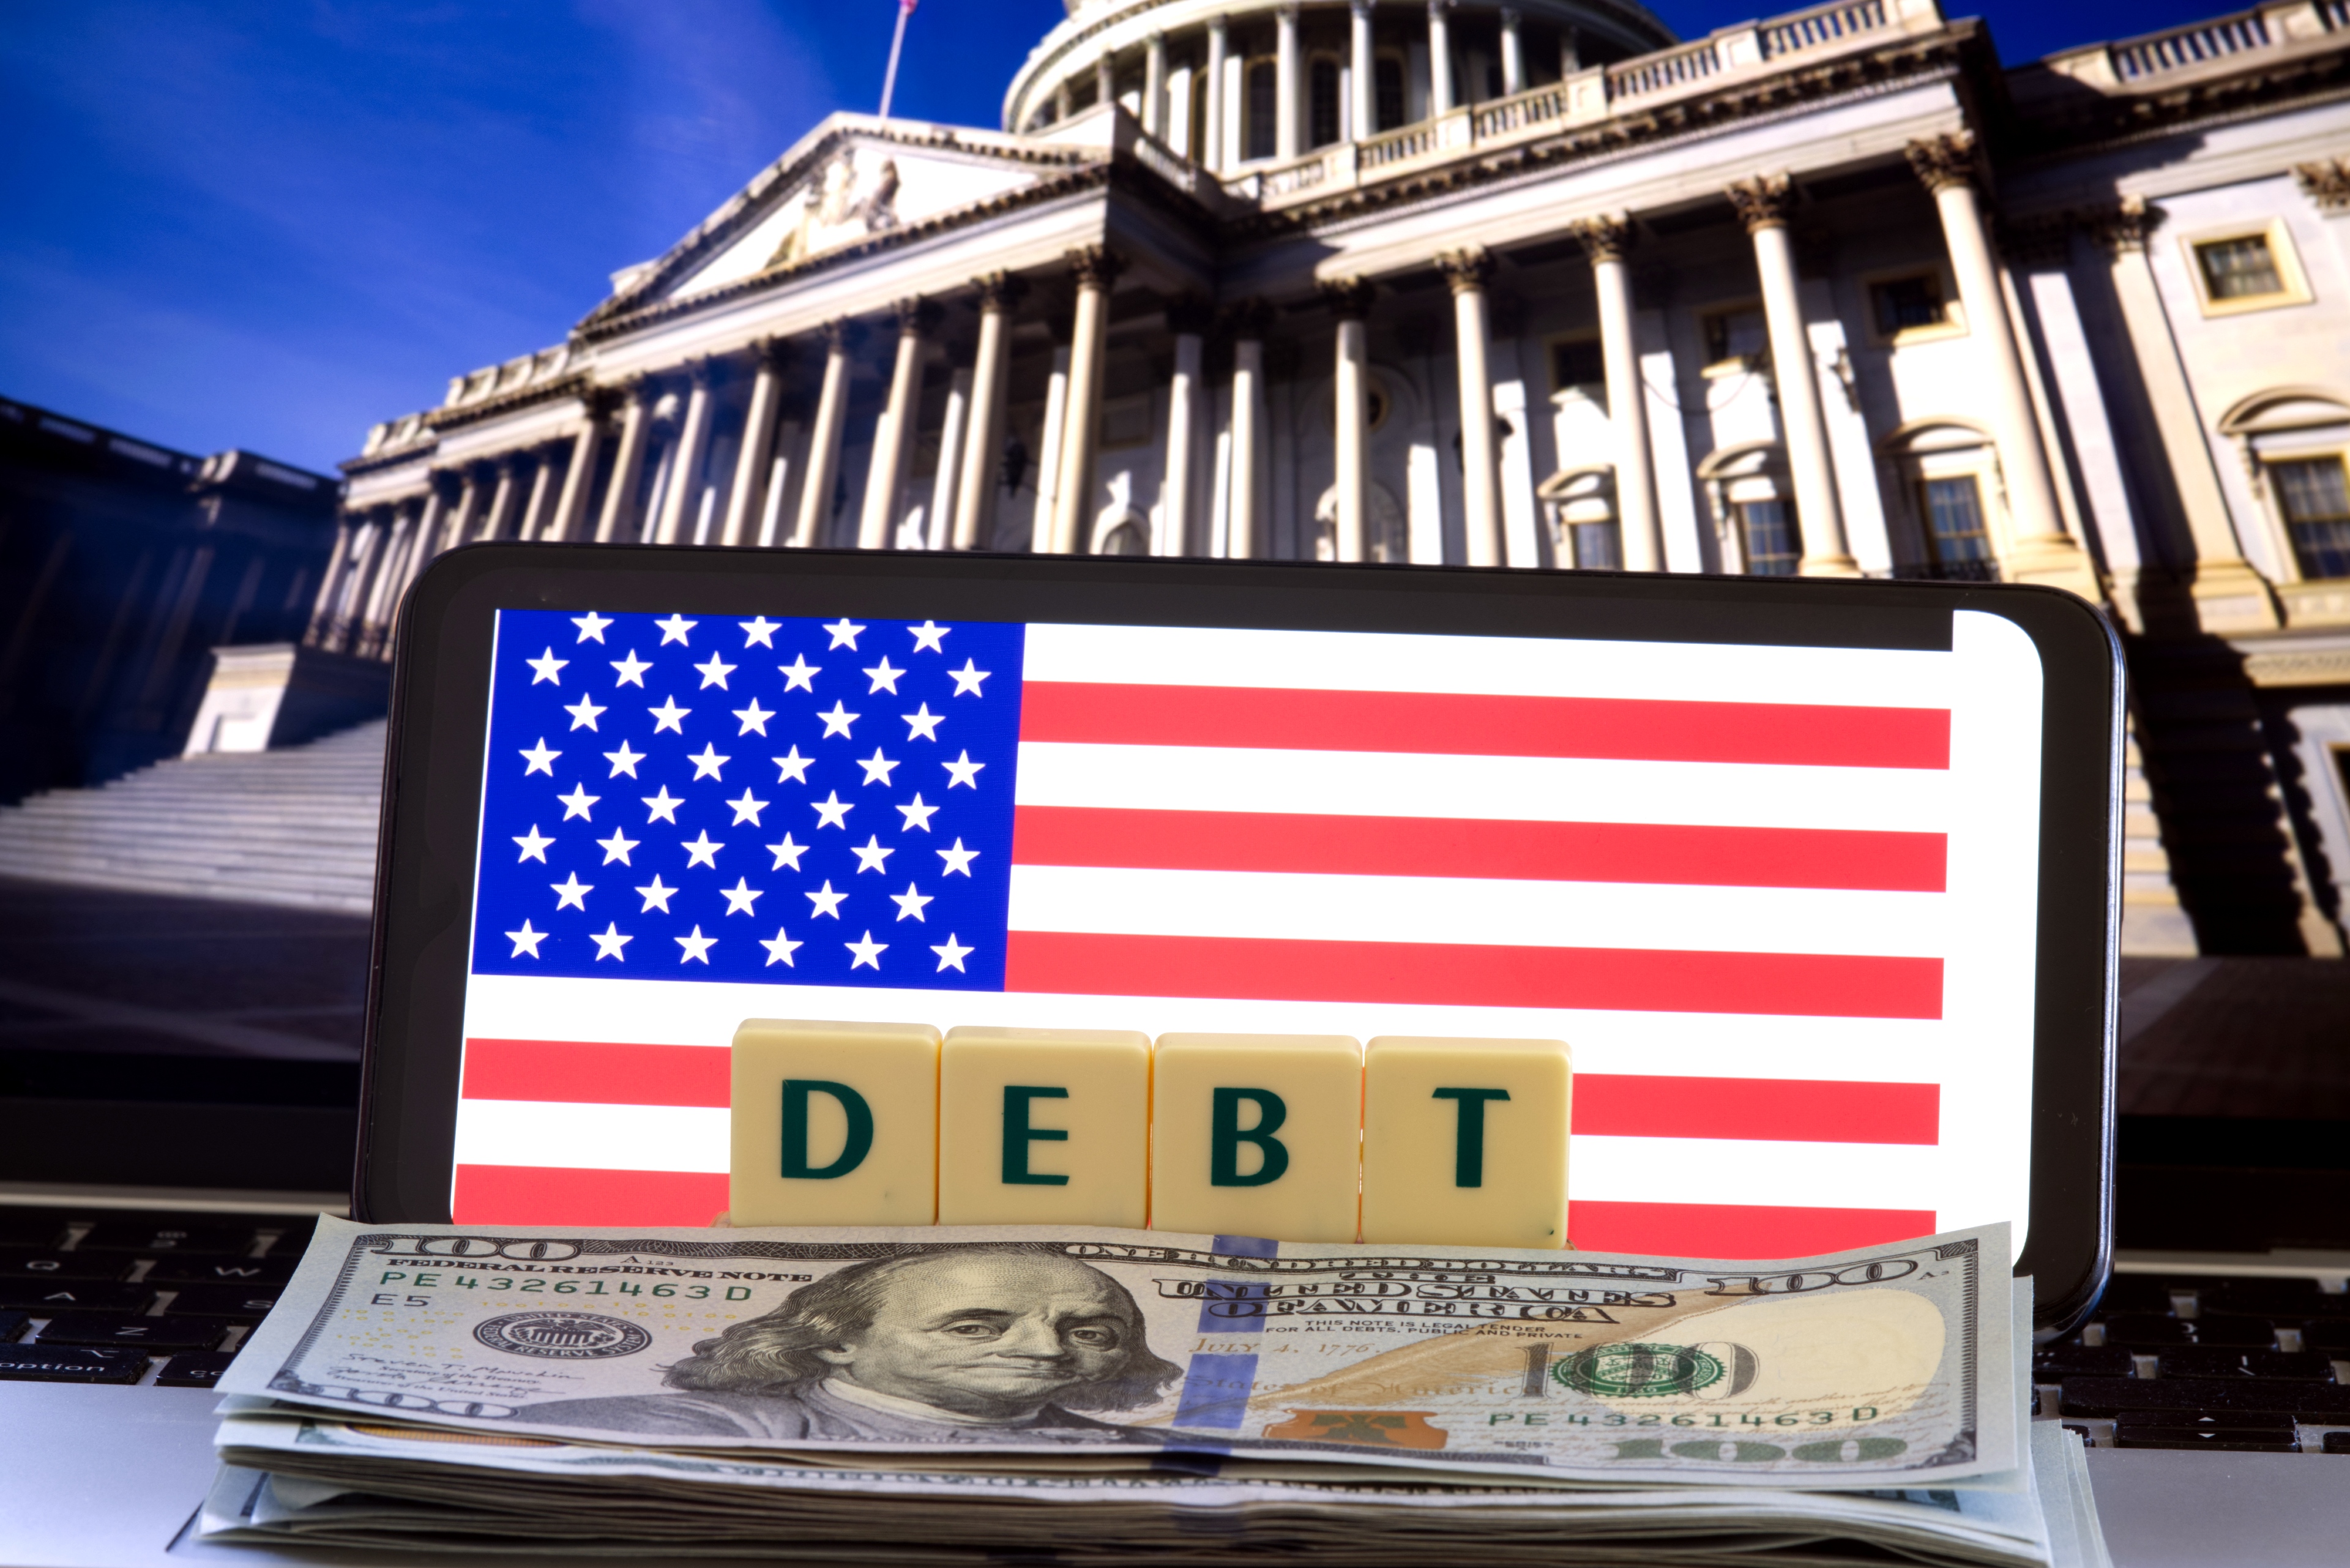 Debt ceiling deal passed: What do you need to know about the Debt deal?